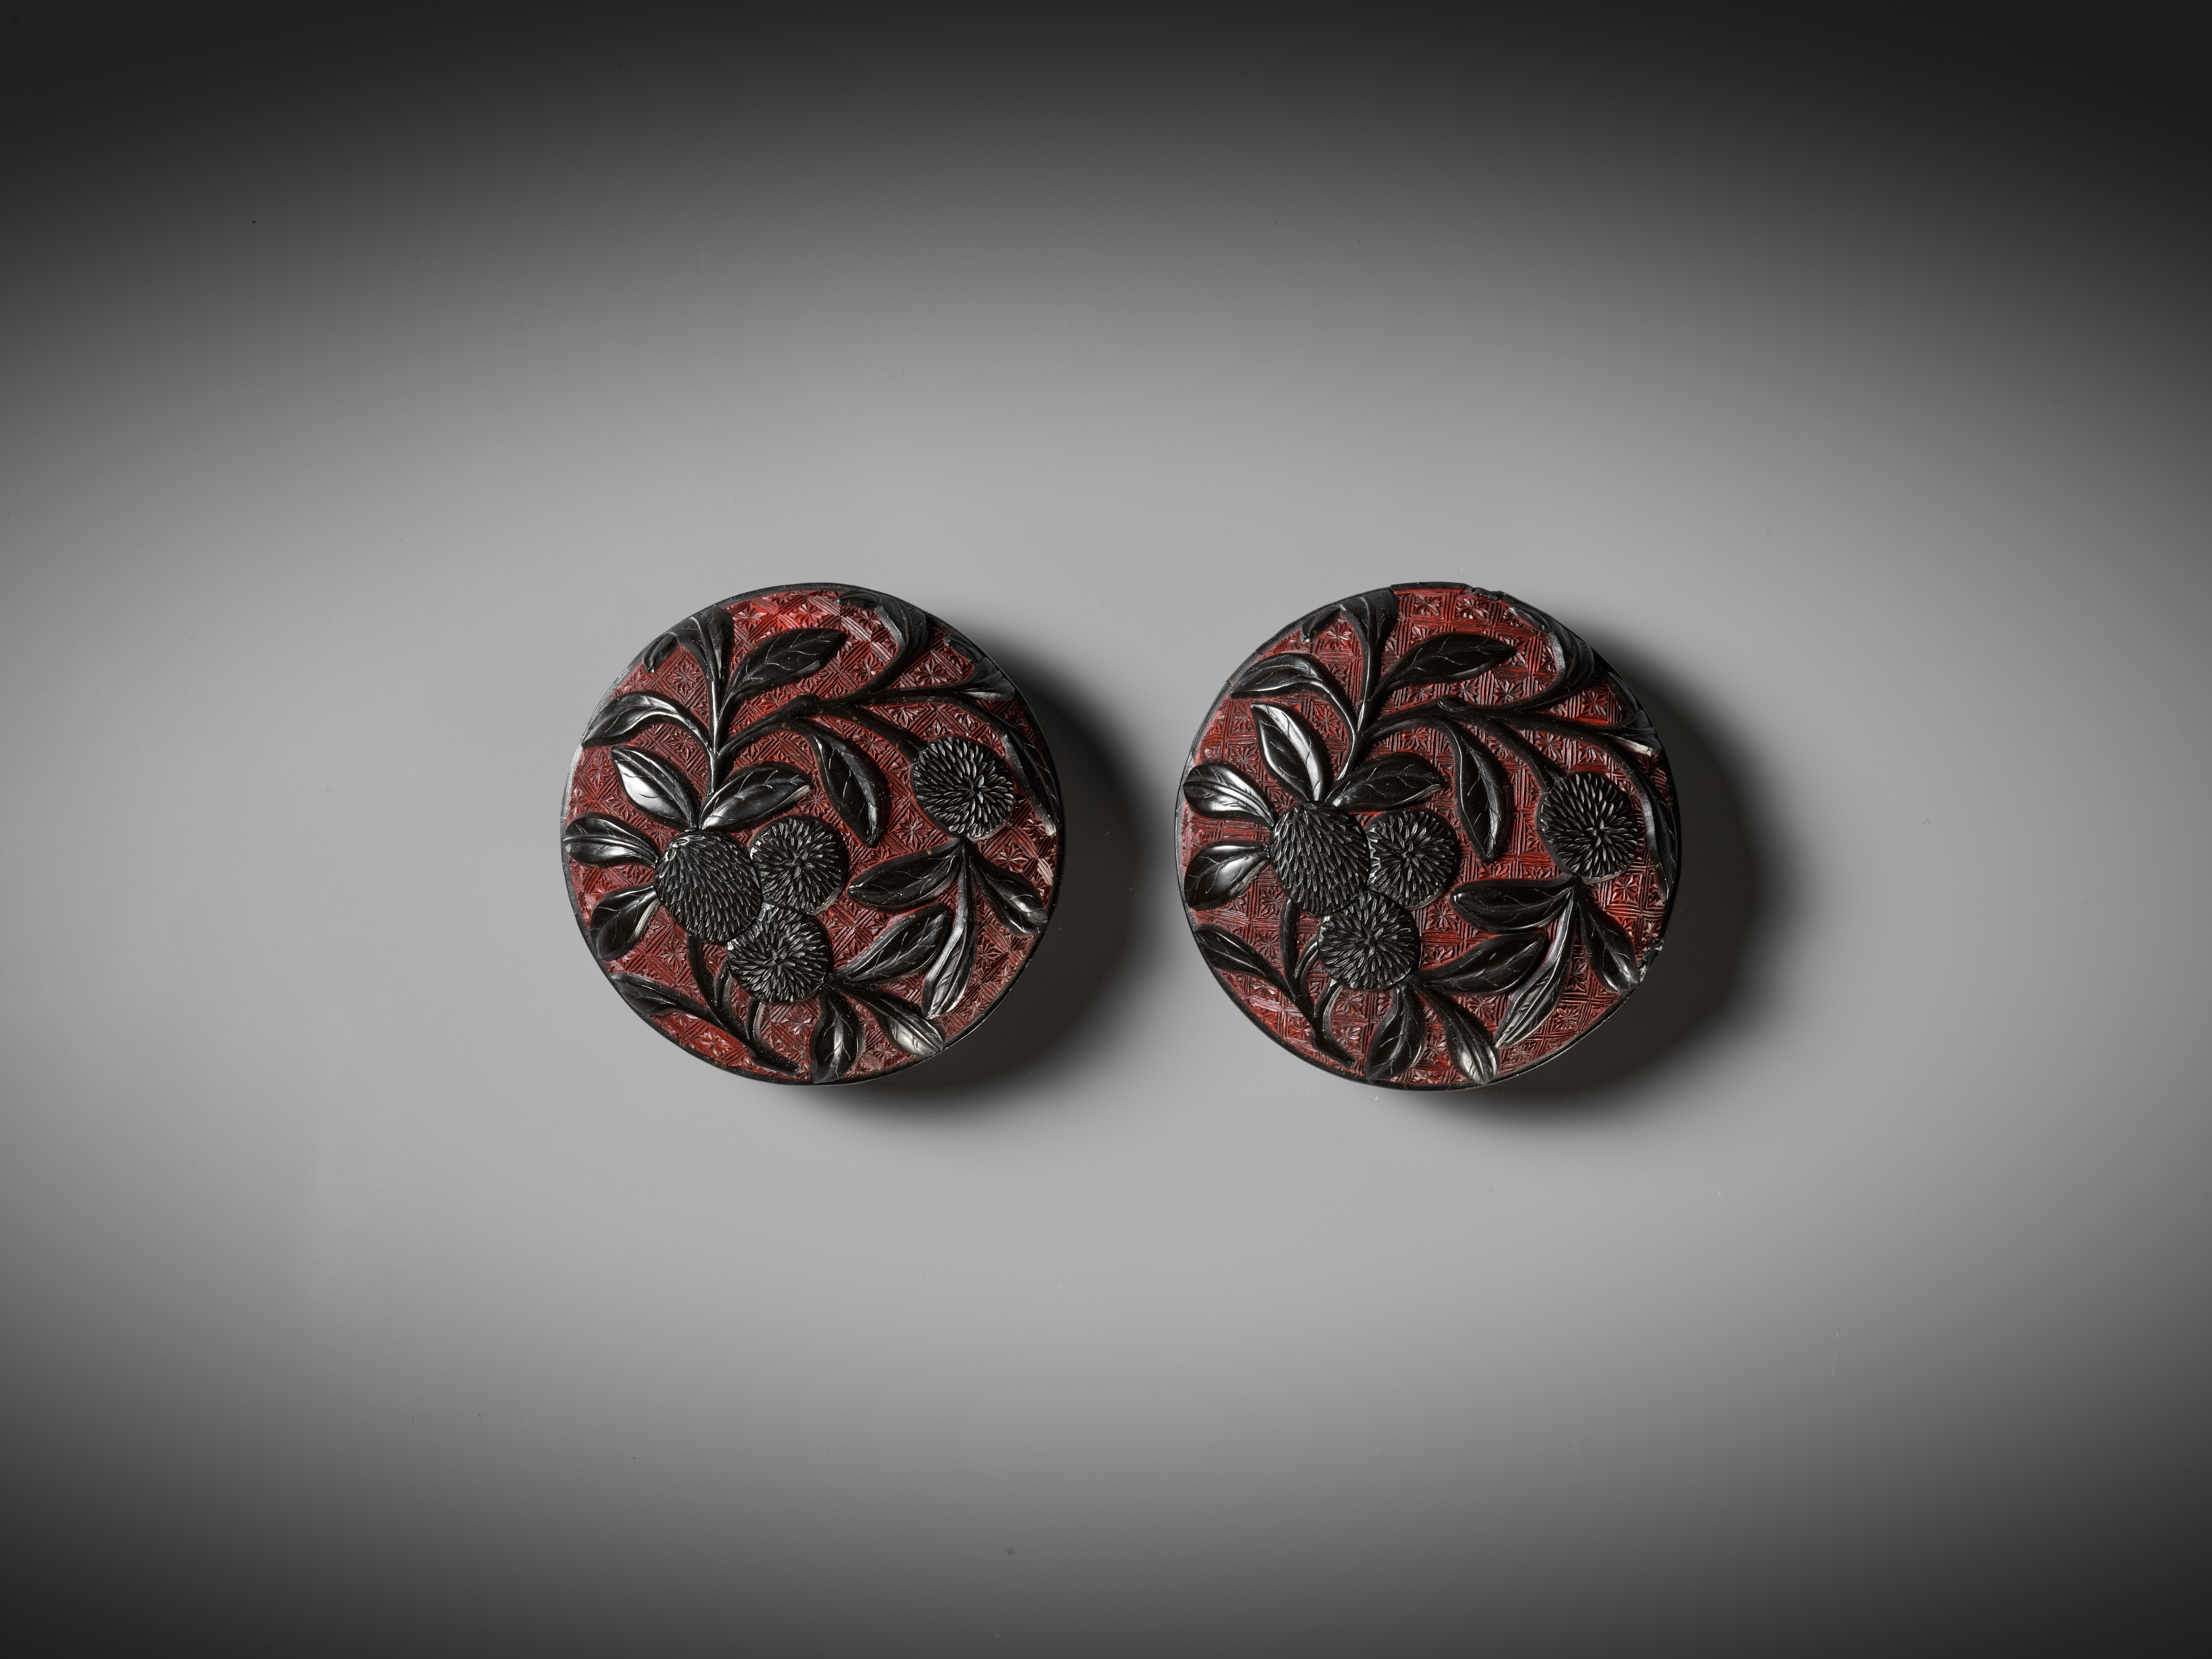 A PAIR OF RED AND BLACK LACQUER 'LYCHEE' BOXES AND COVERS, MING DYNASTY - Image 8 of 11